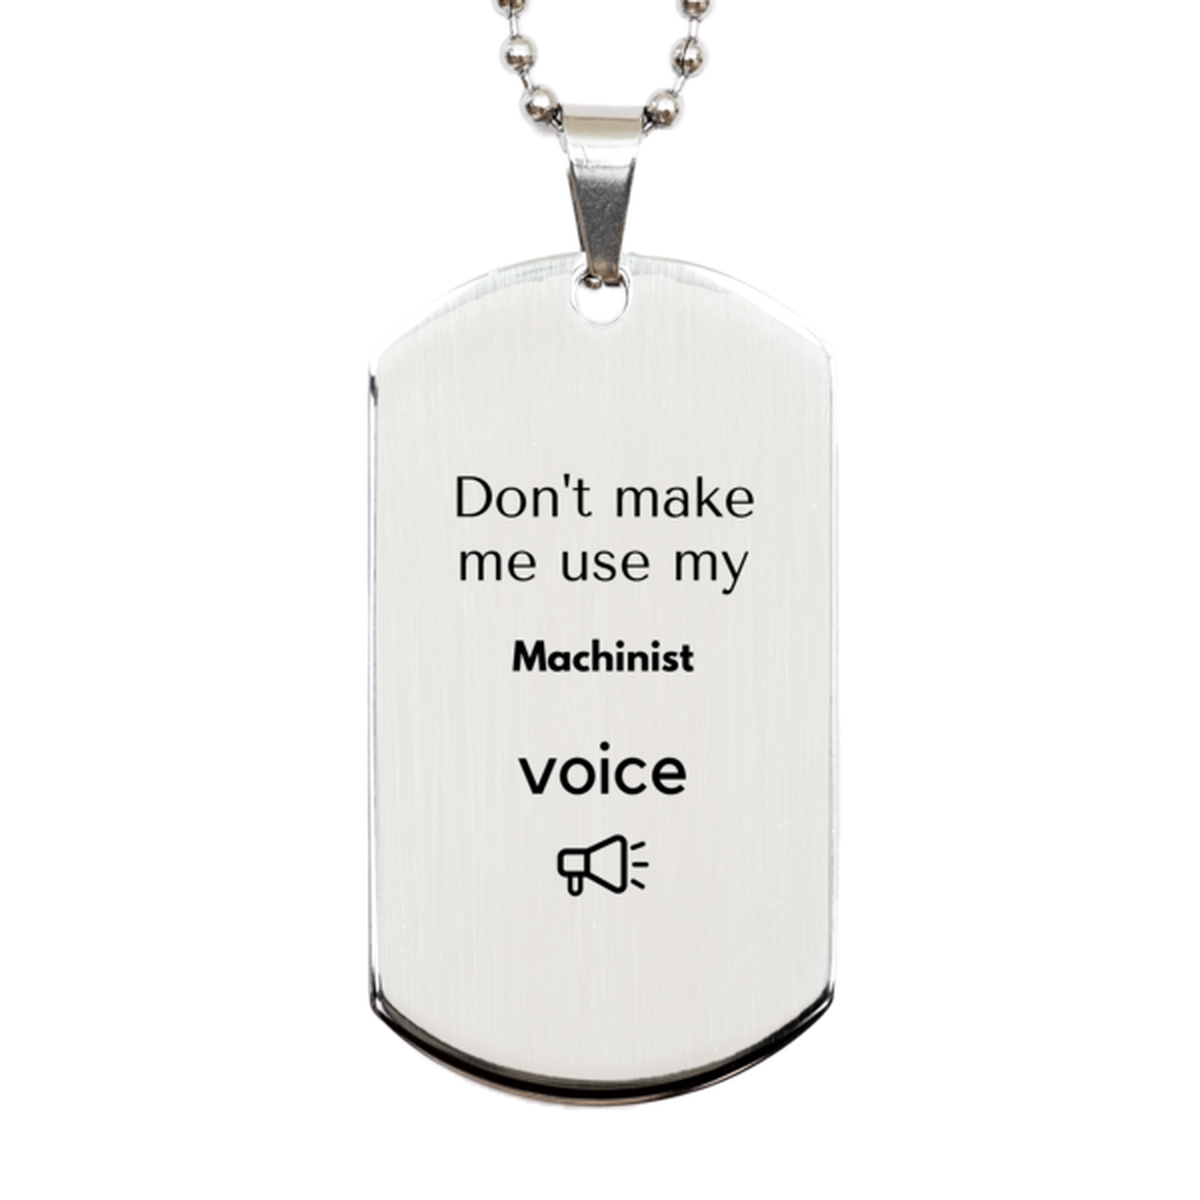 Don't make me use my Machinist voice, Sarcasm Machinist Gifts, Christmas Machinist Silver Dog Tag Birthday Unique Gifts For Machinist Coworkers, Men, Women, Colleague, Friends